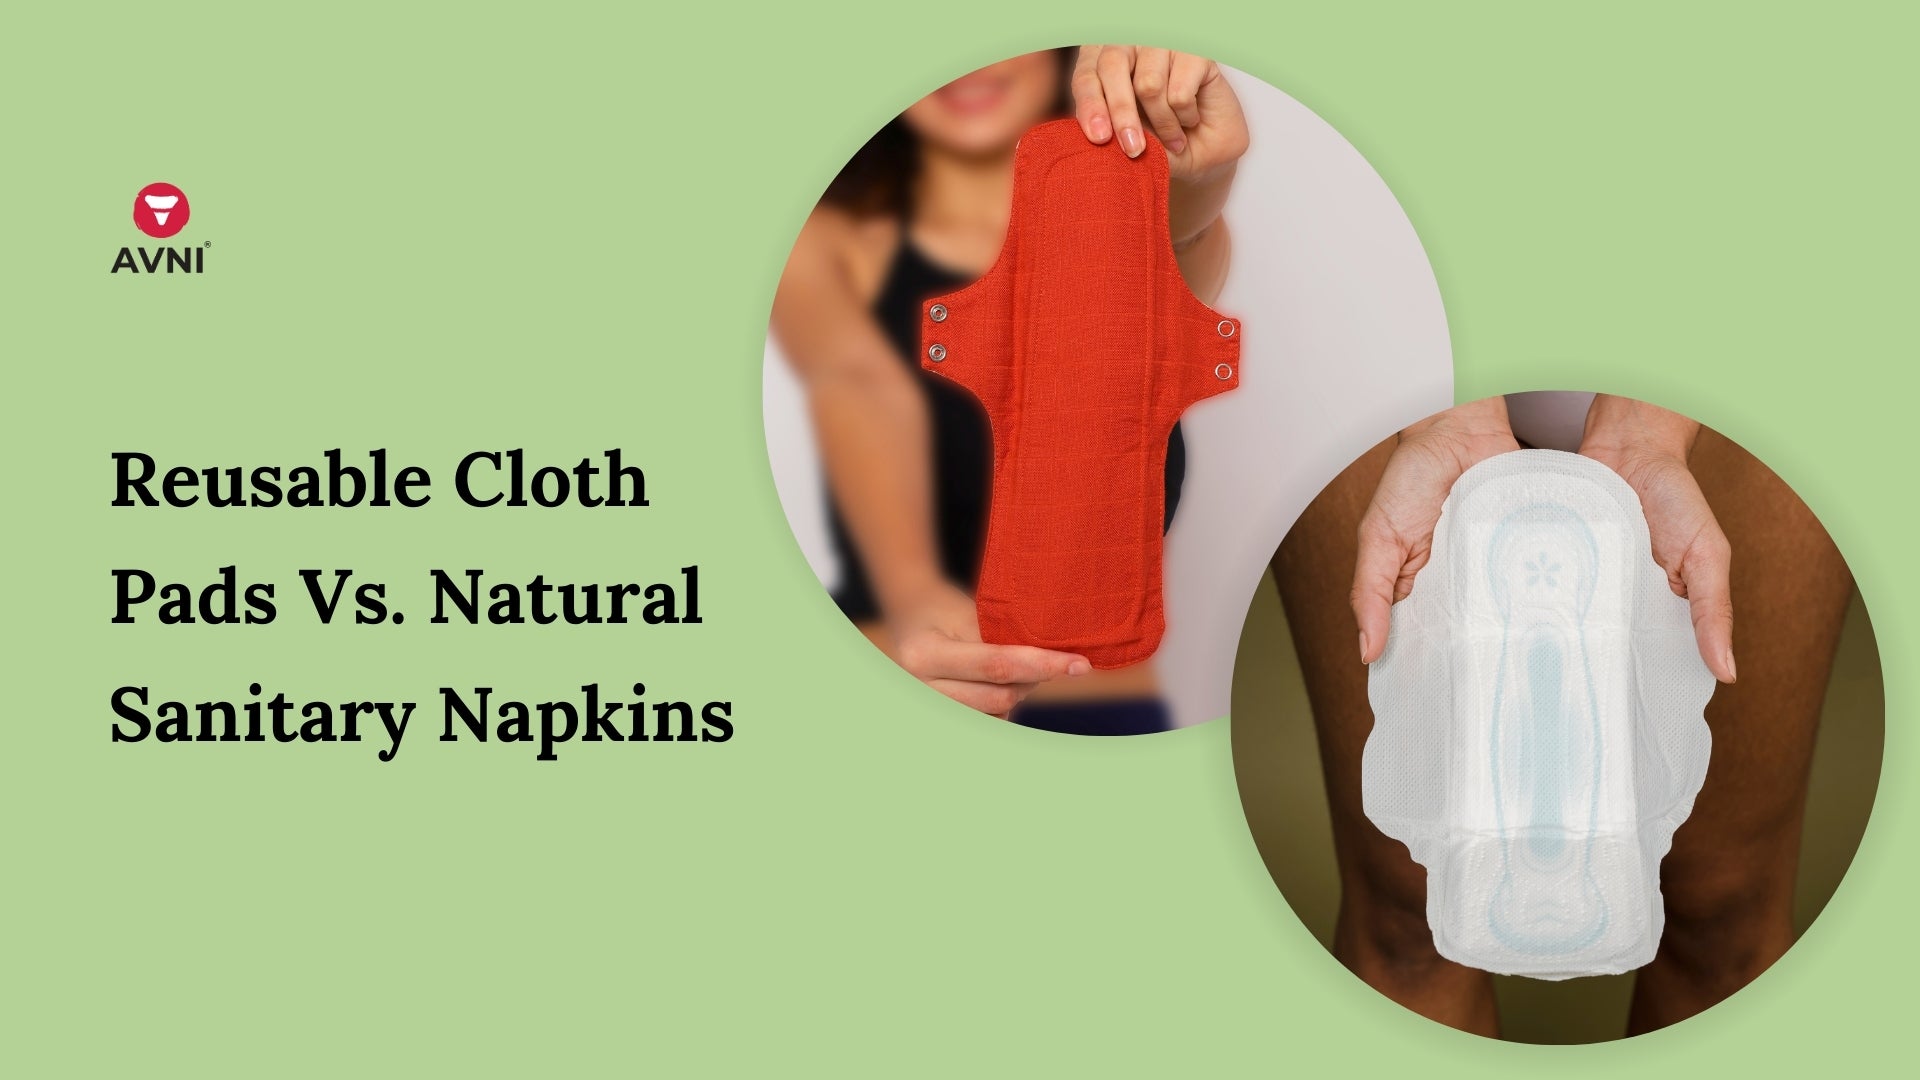 5 Amazing Benefits of Reusable Cloth Menstrual Pads + How to Switch